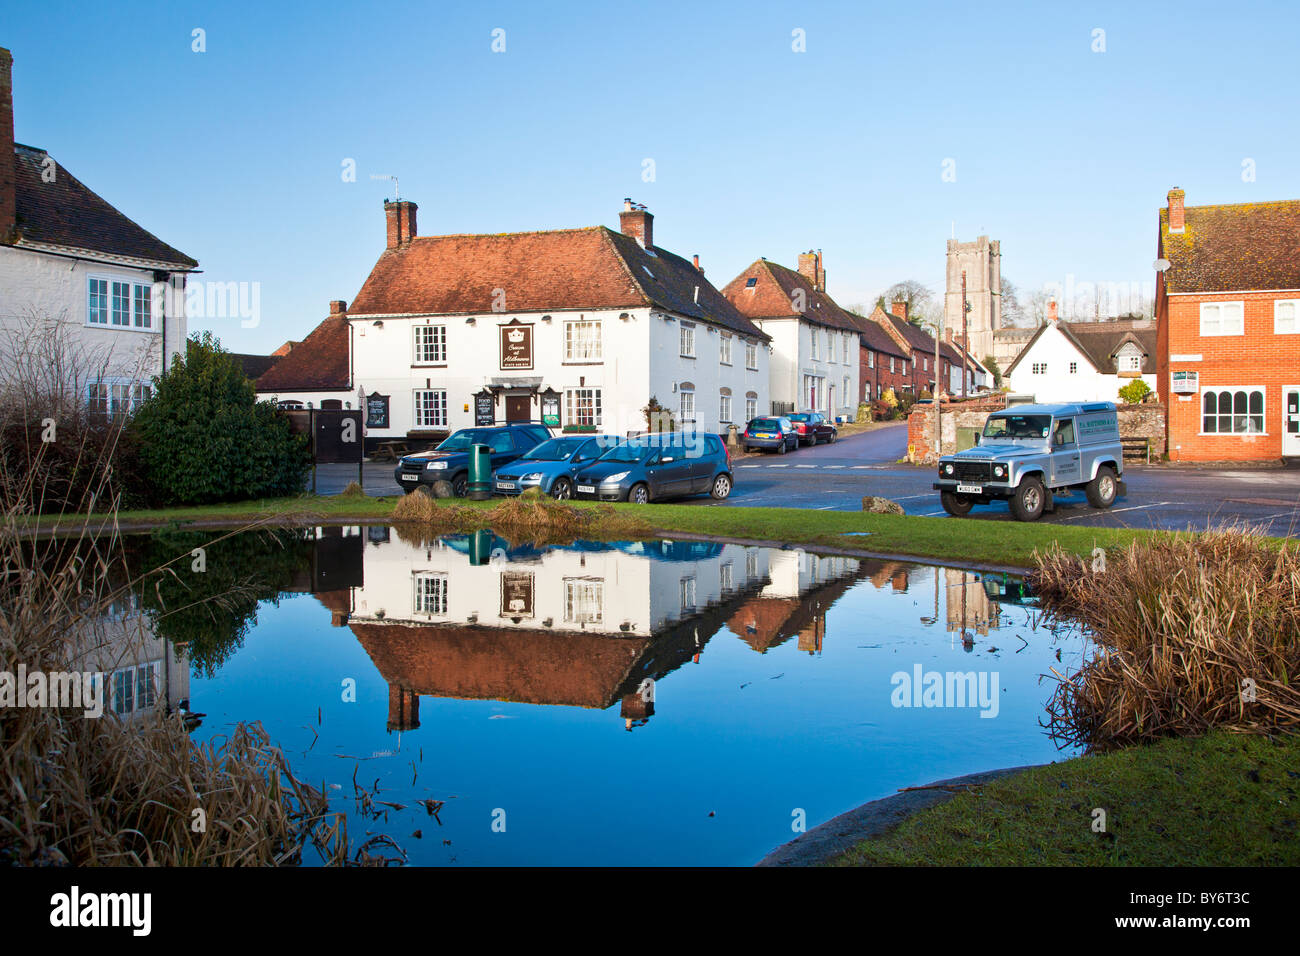 The square, houses, pub and church reflected in the village pond in winter in the village of Aldbourne, Wiltshire, England, UK Stock Photo